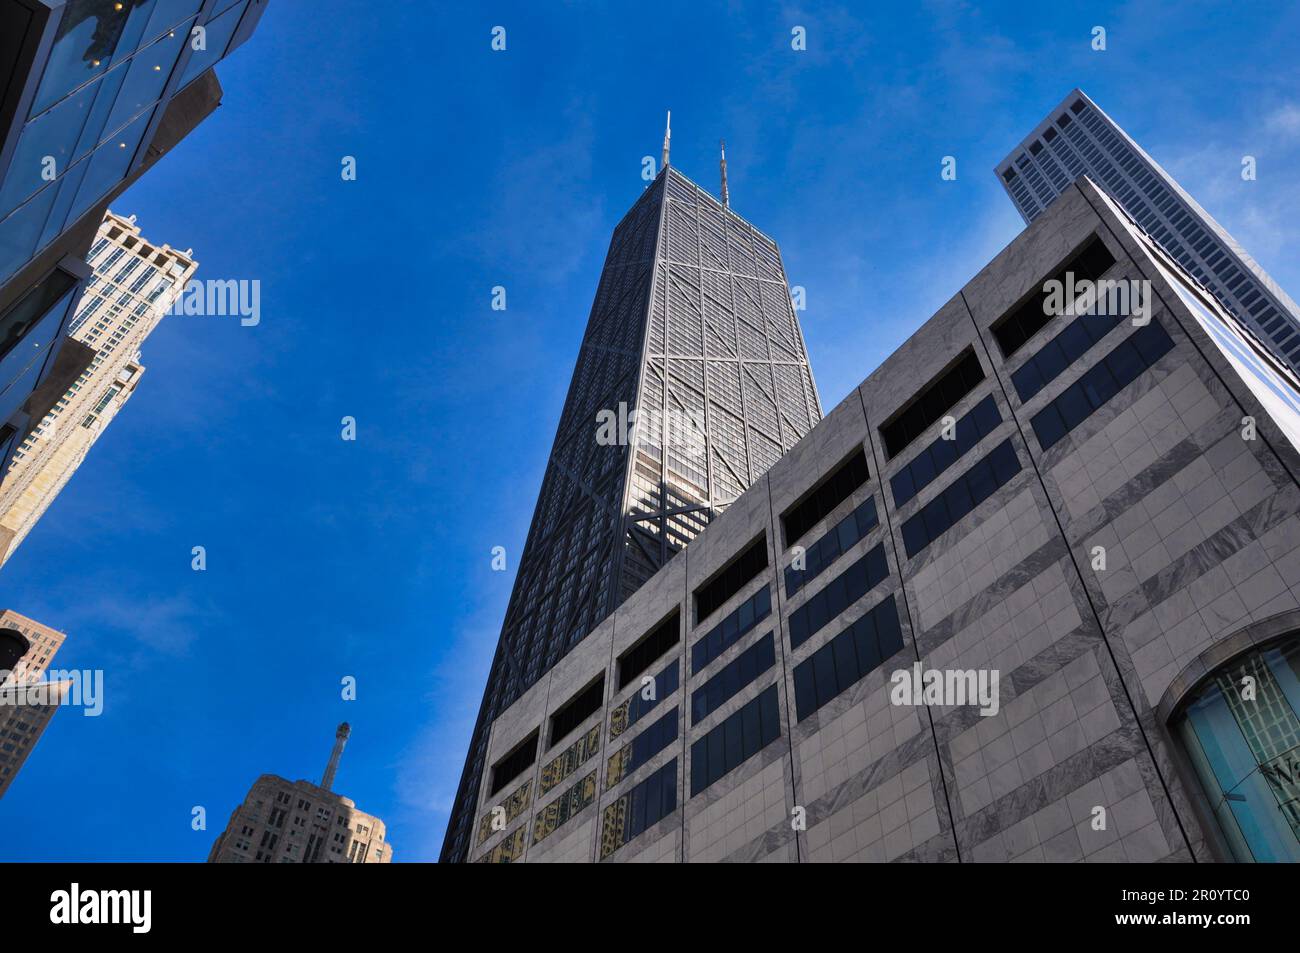 This is a view of a skyscraper as seen looking up from the street Stock Photo